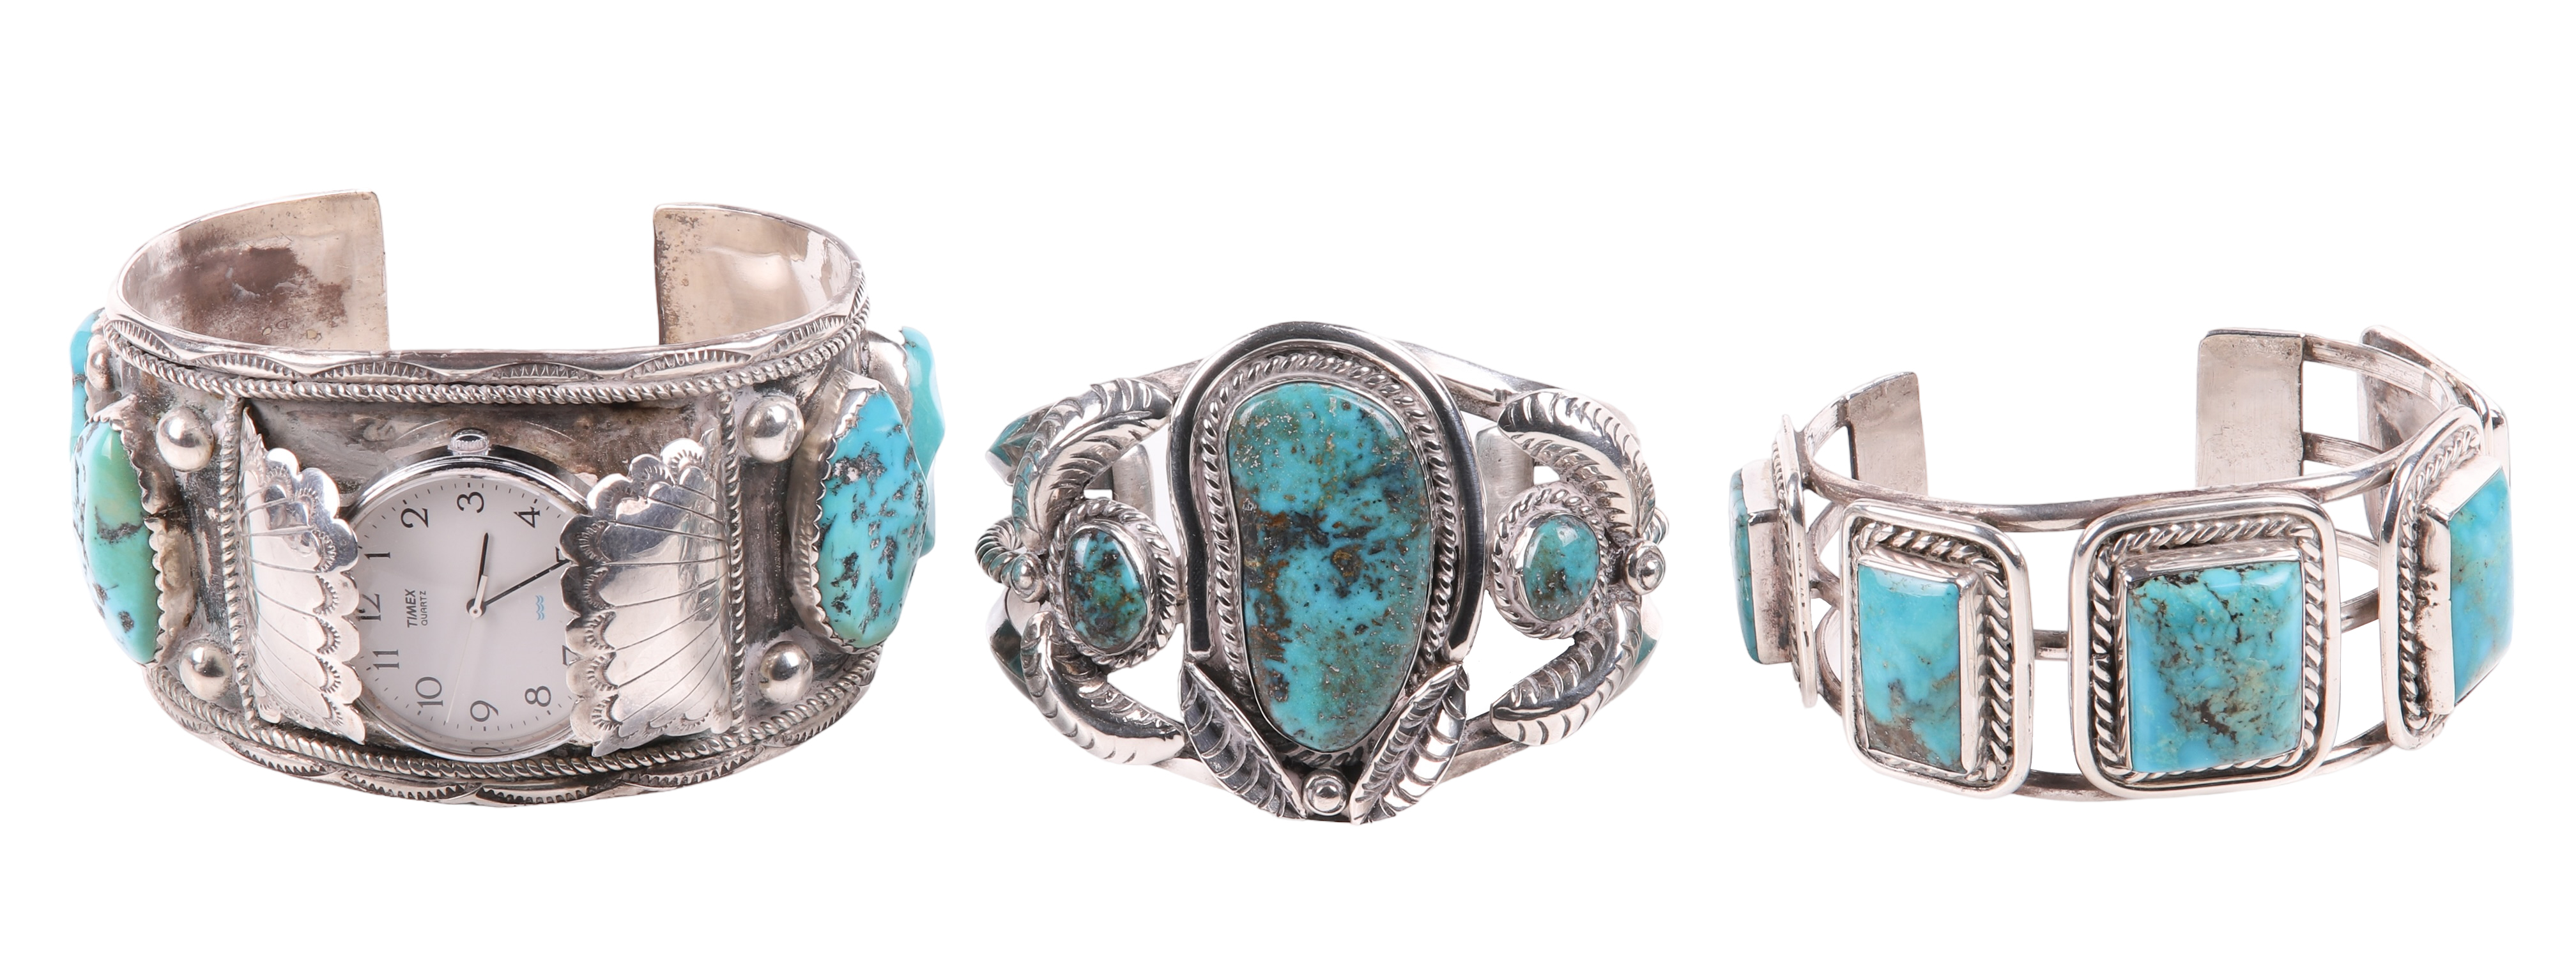  3 Sterling and turquoise cuff 2e0dd6